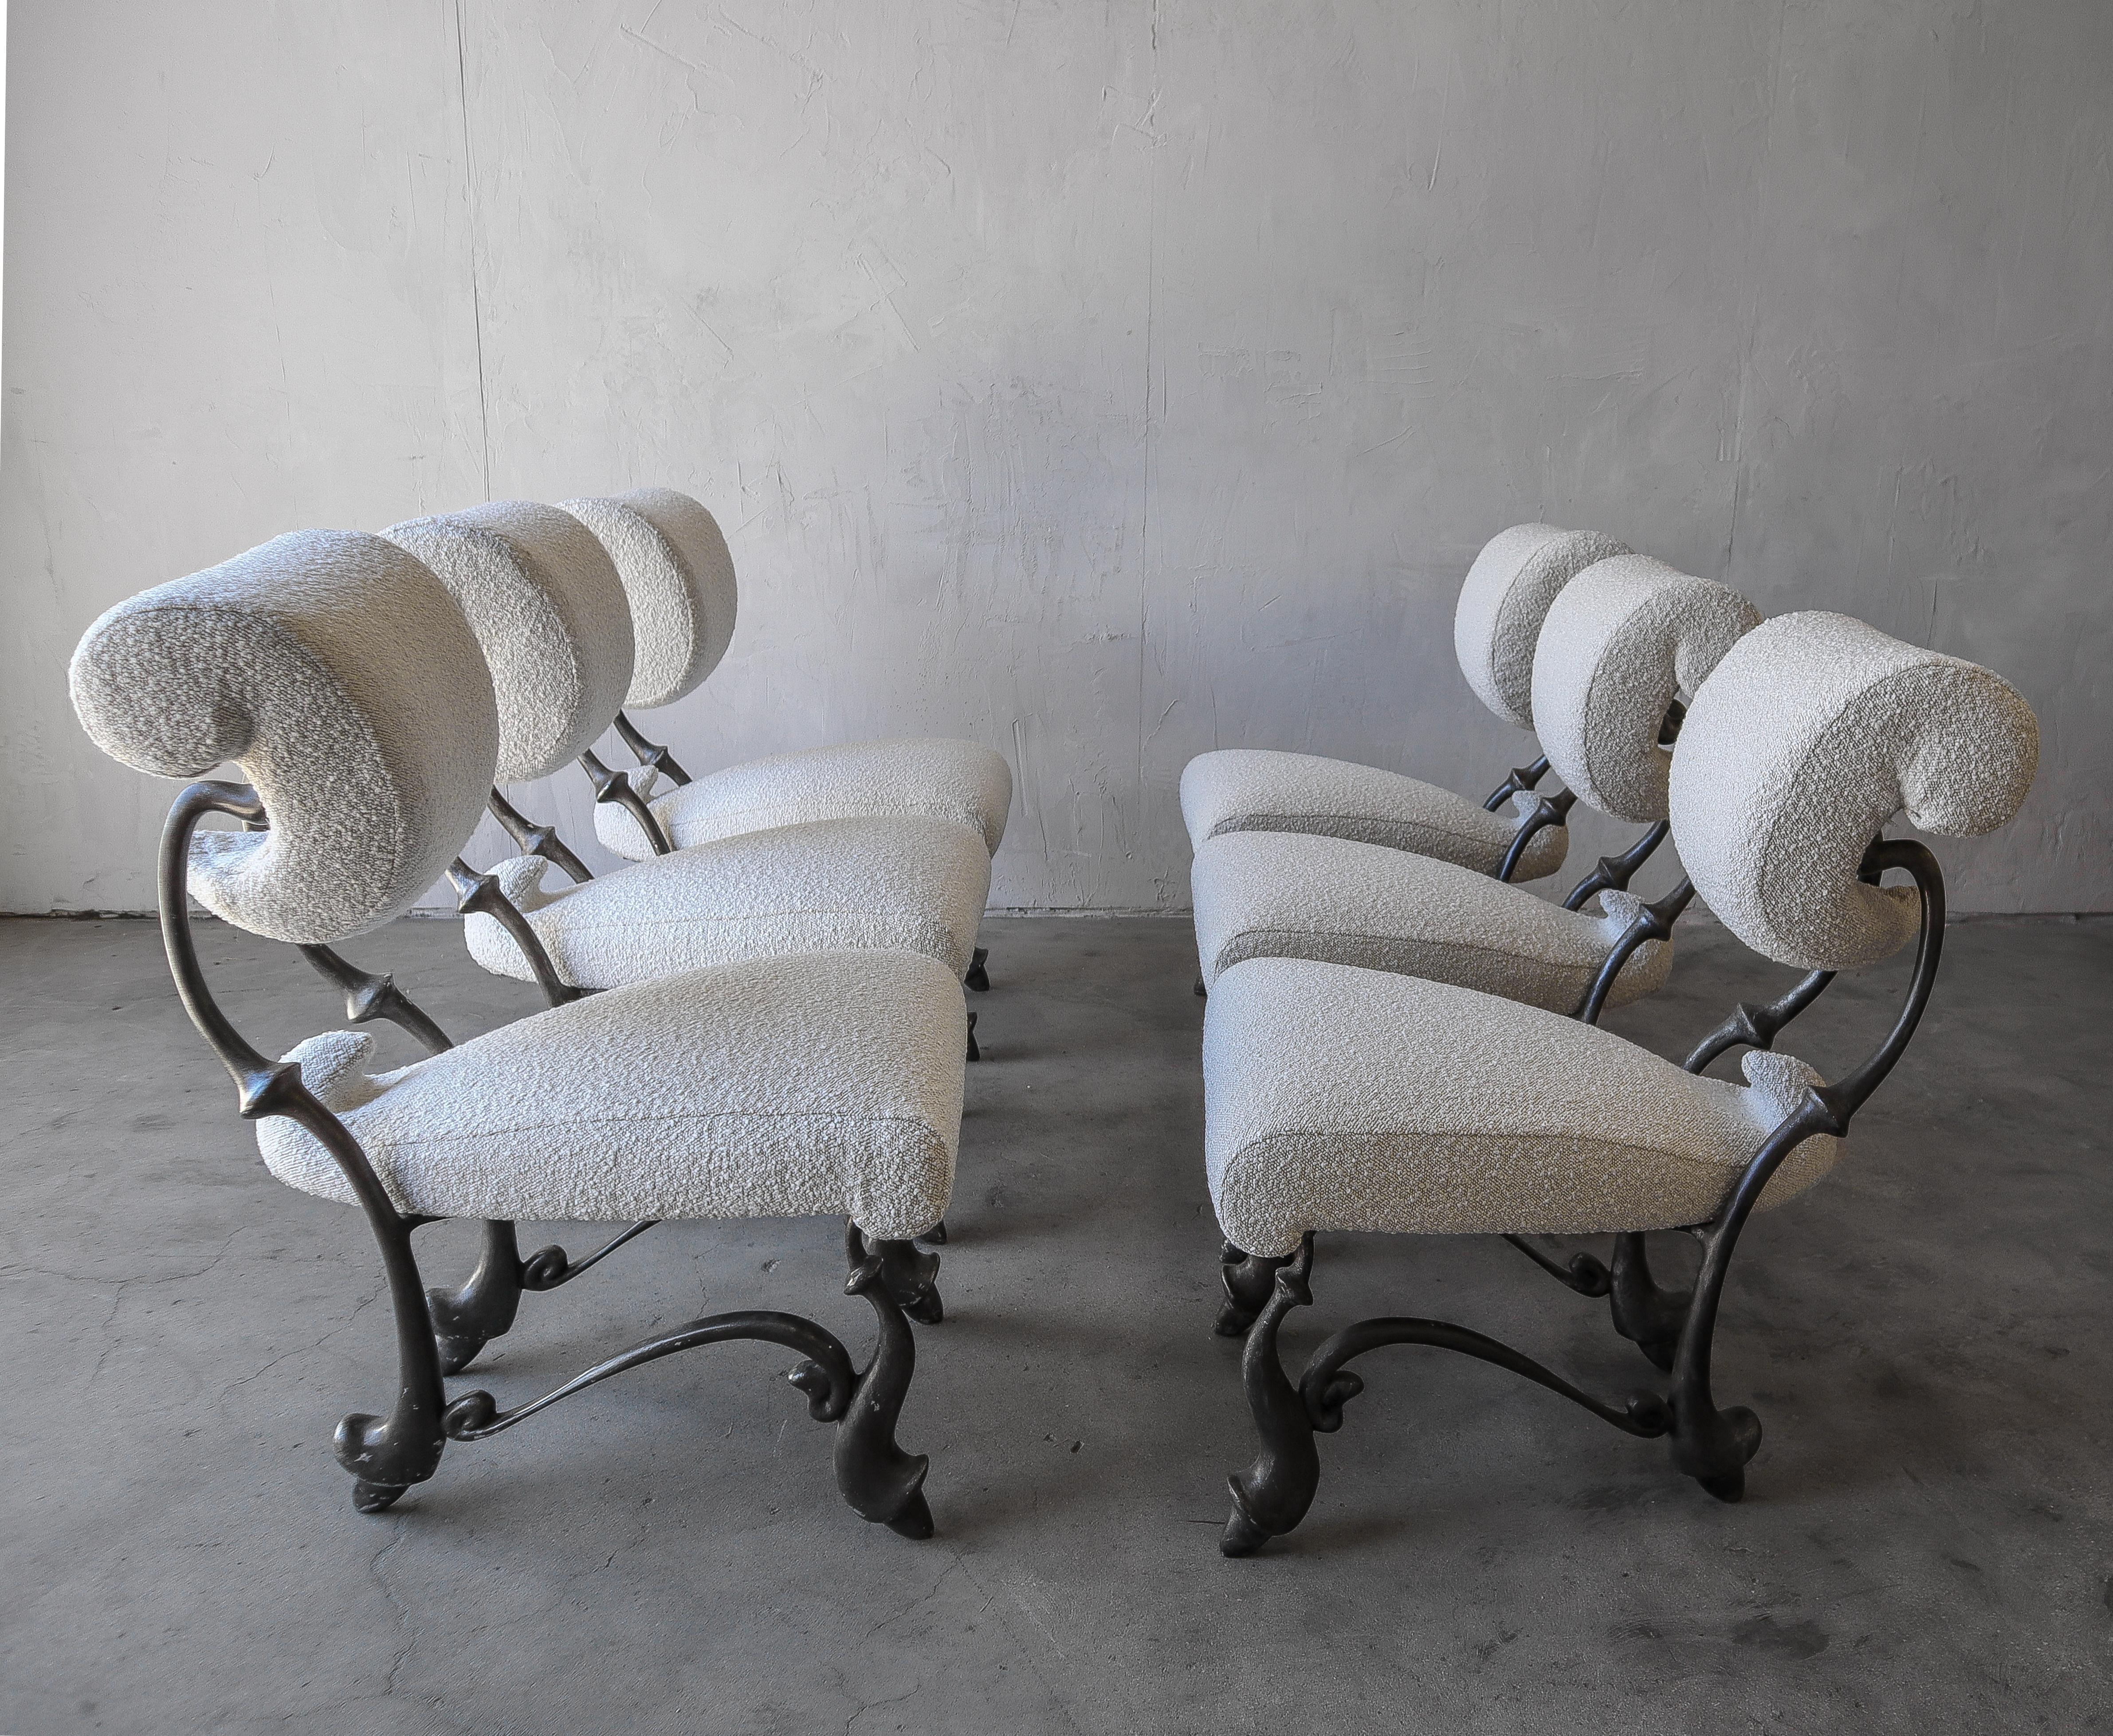 Absolutely incredible set of 6 Iridium ballet chairs, by Jordan Mozer. These chairs were created for the Iridium restaurant in New York in 1992. Cast out of solid, recycled aluminum-magnesium alloy, and upholstered in all new boucle fabric.

Looking